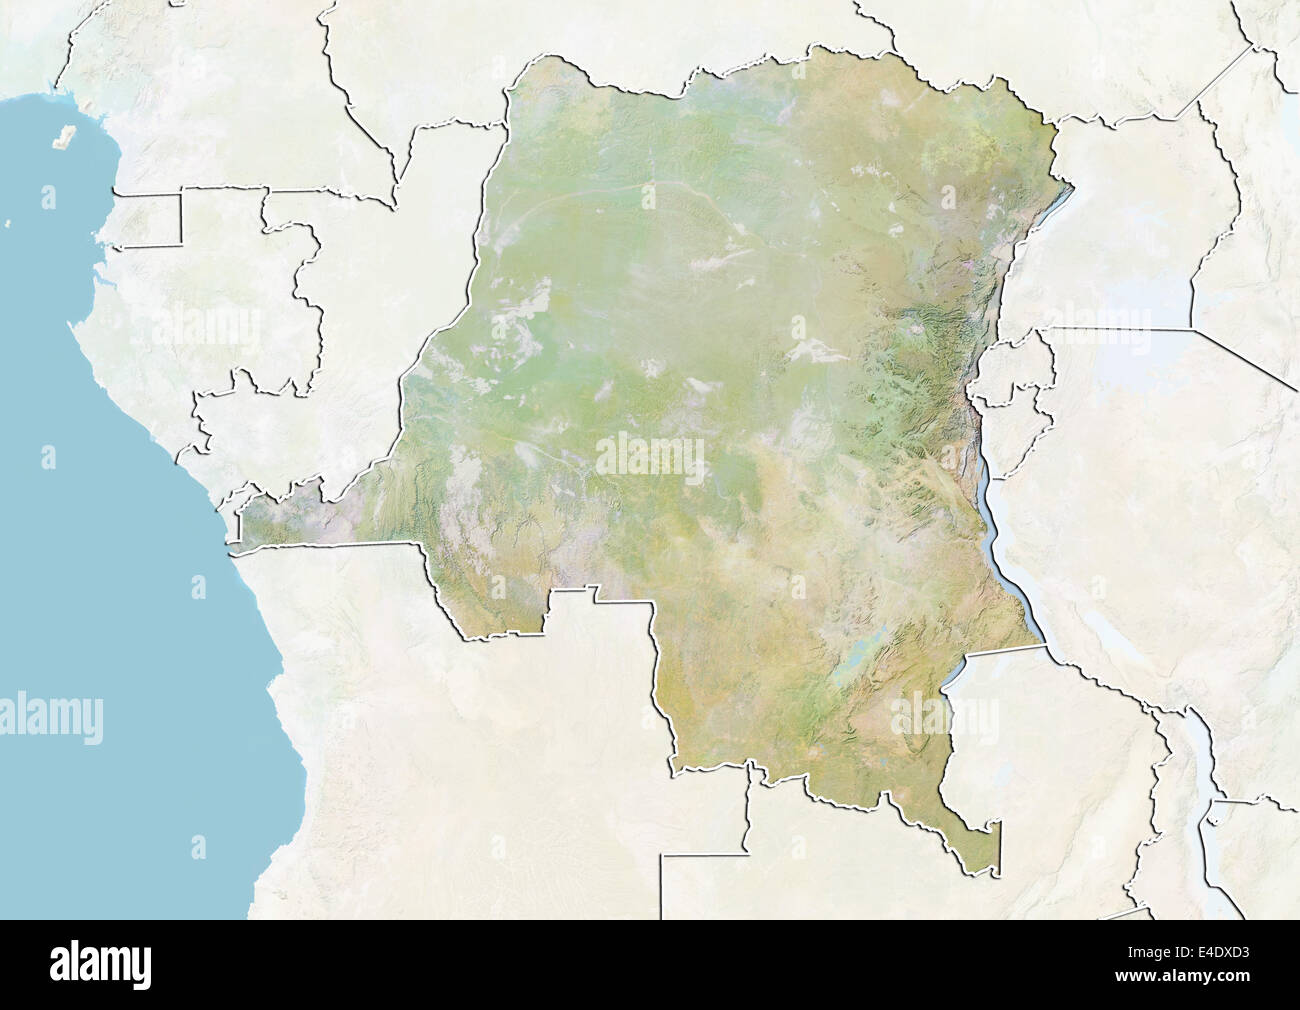 Democratic Republic of Congo, Relief Map With Border and Mask Stock Photo